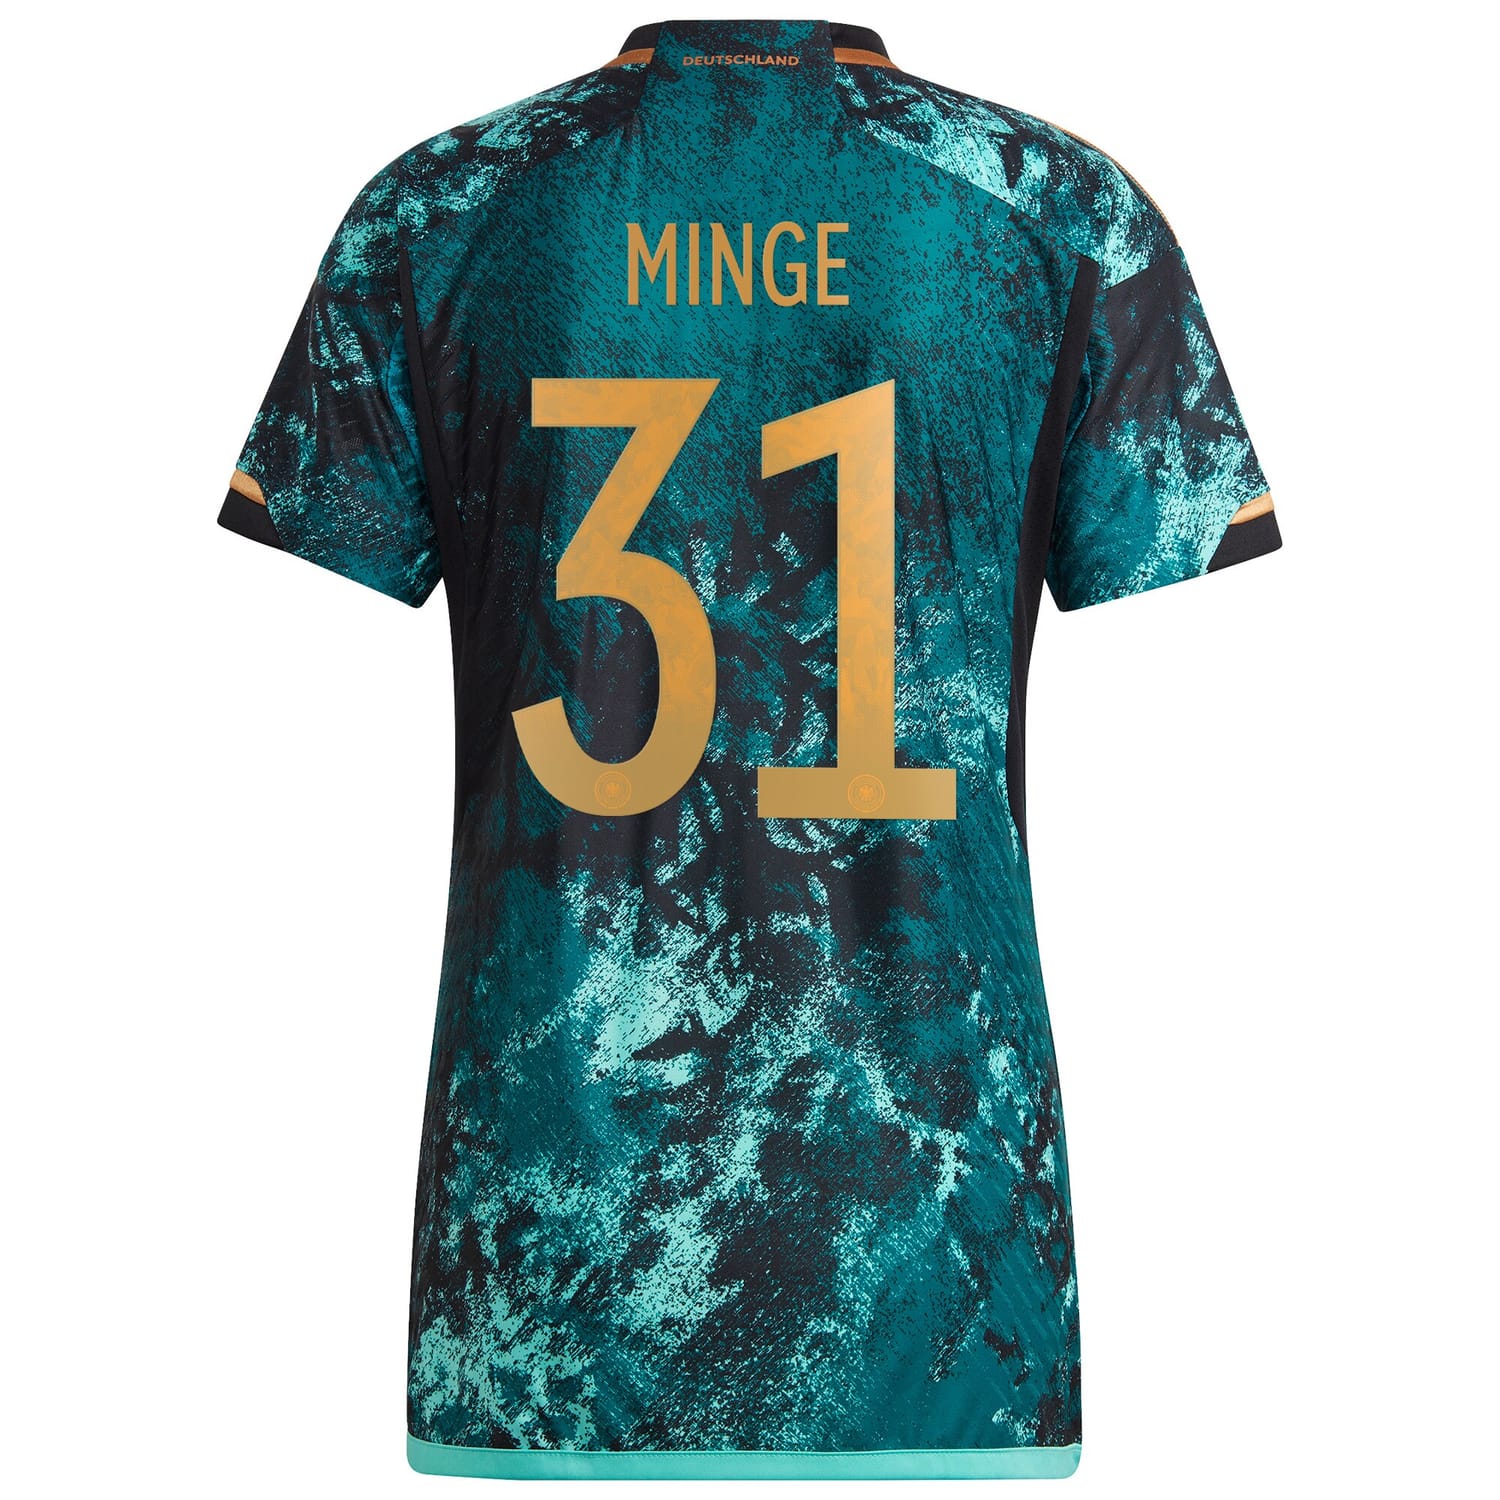 Germany National Team Away Authentic Jersey Shirt 2023 player Janina Minge 31 printing for Women